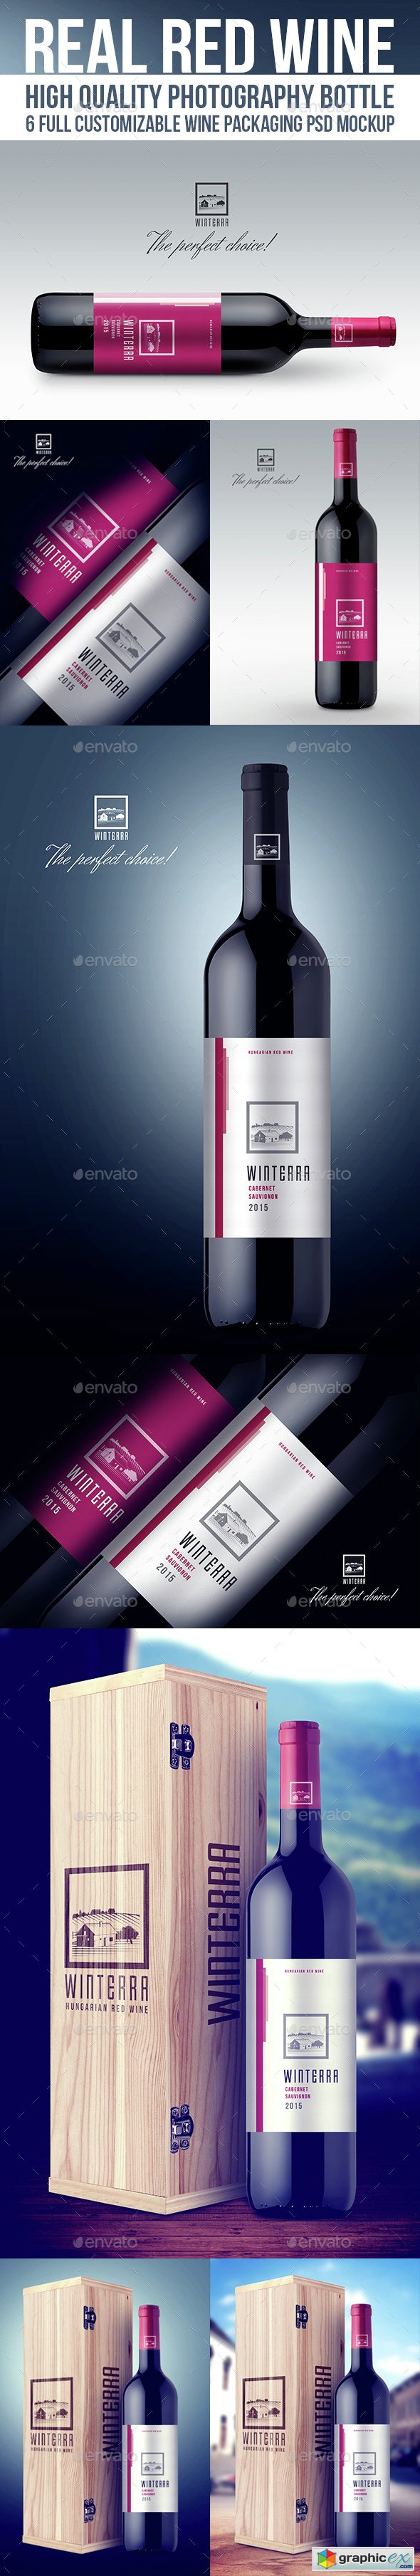 Real Red Wine Mockup